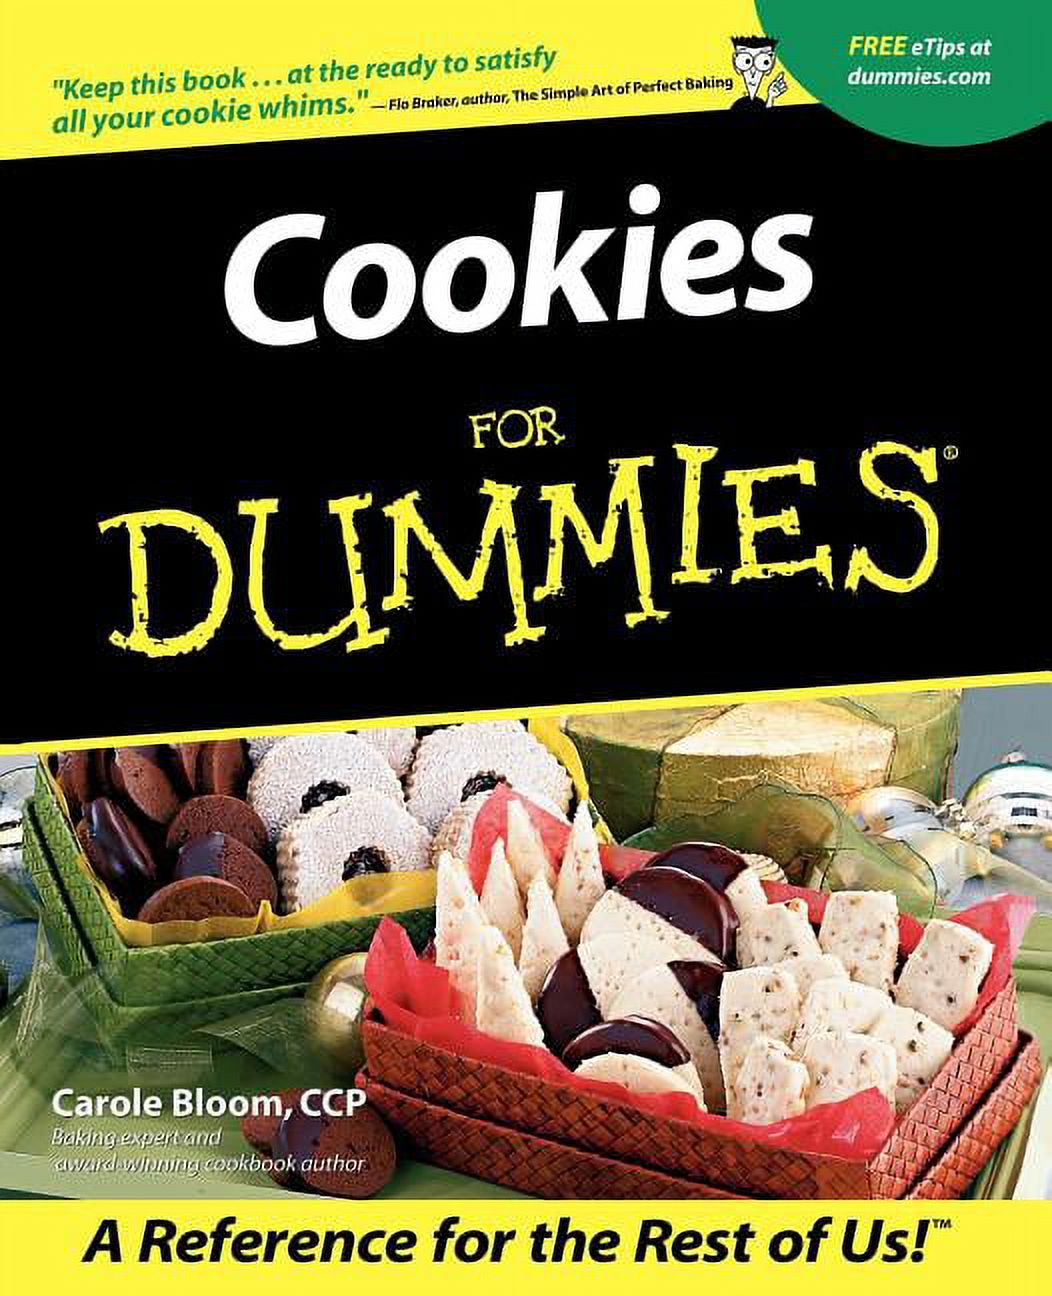 For Dummies: Cookies for Dummies (Paperback) - image 1 of 2